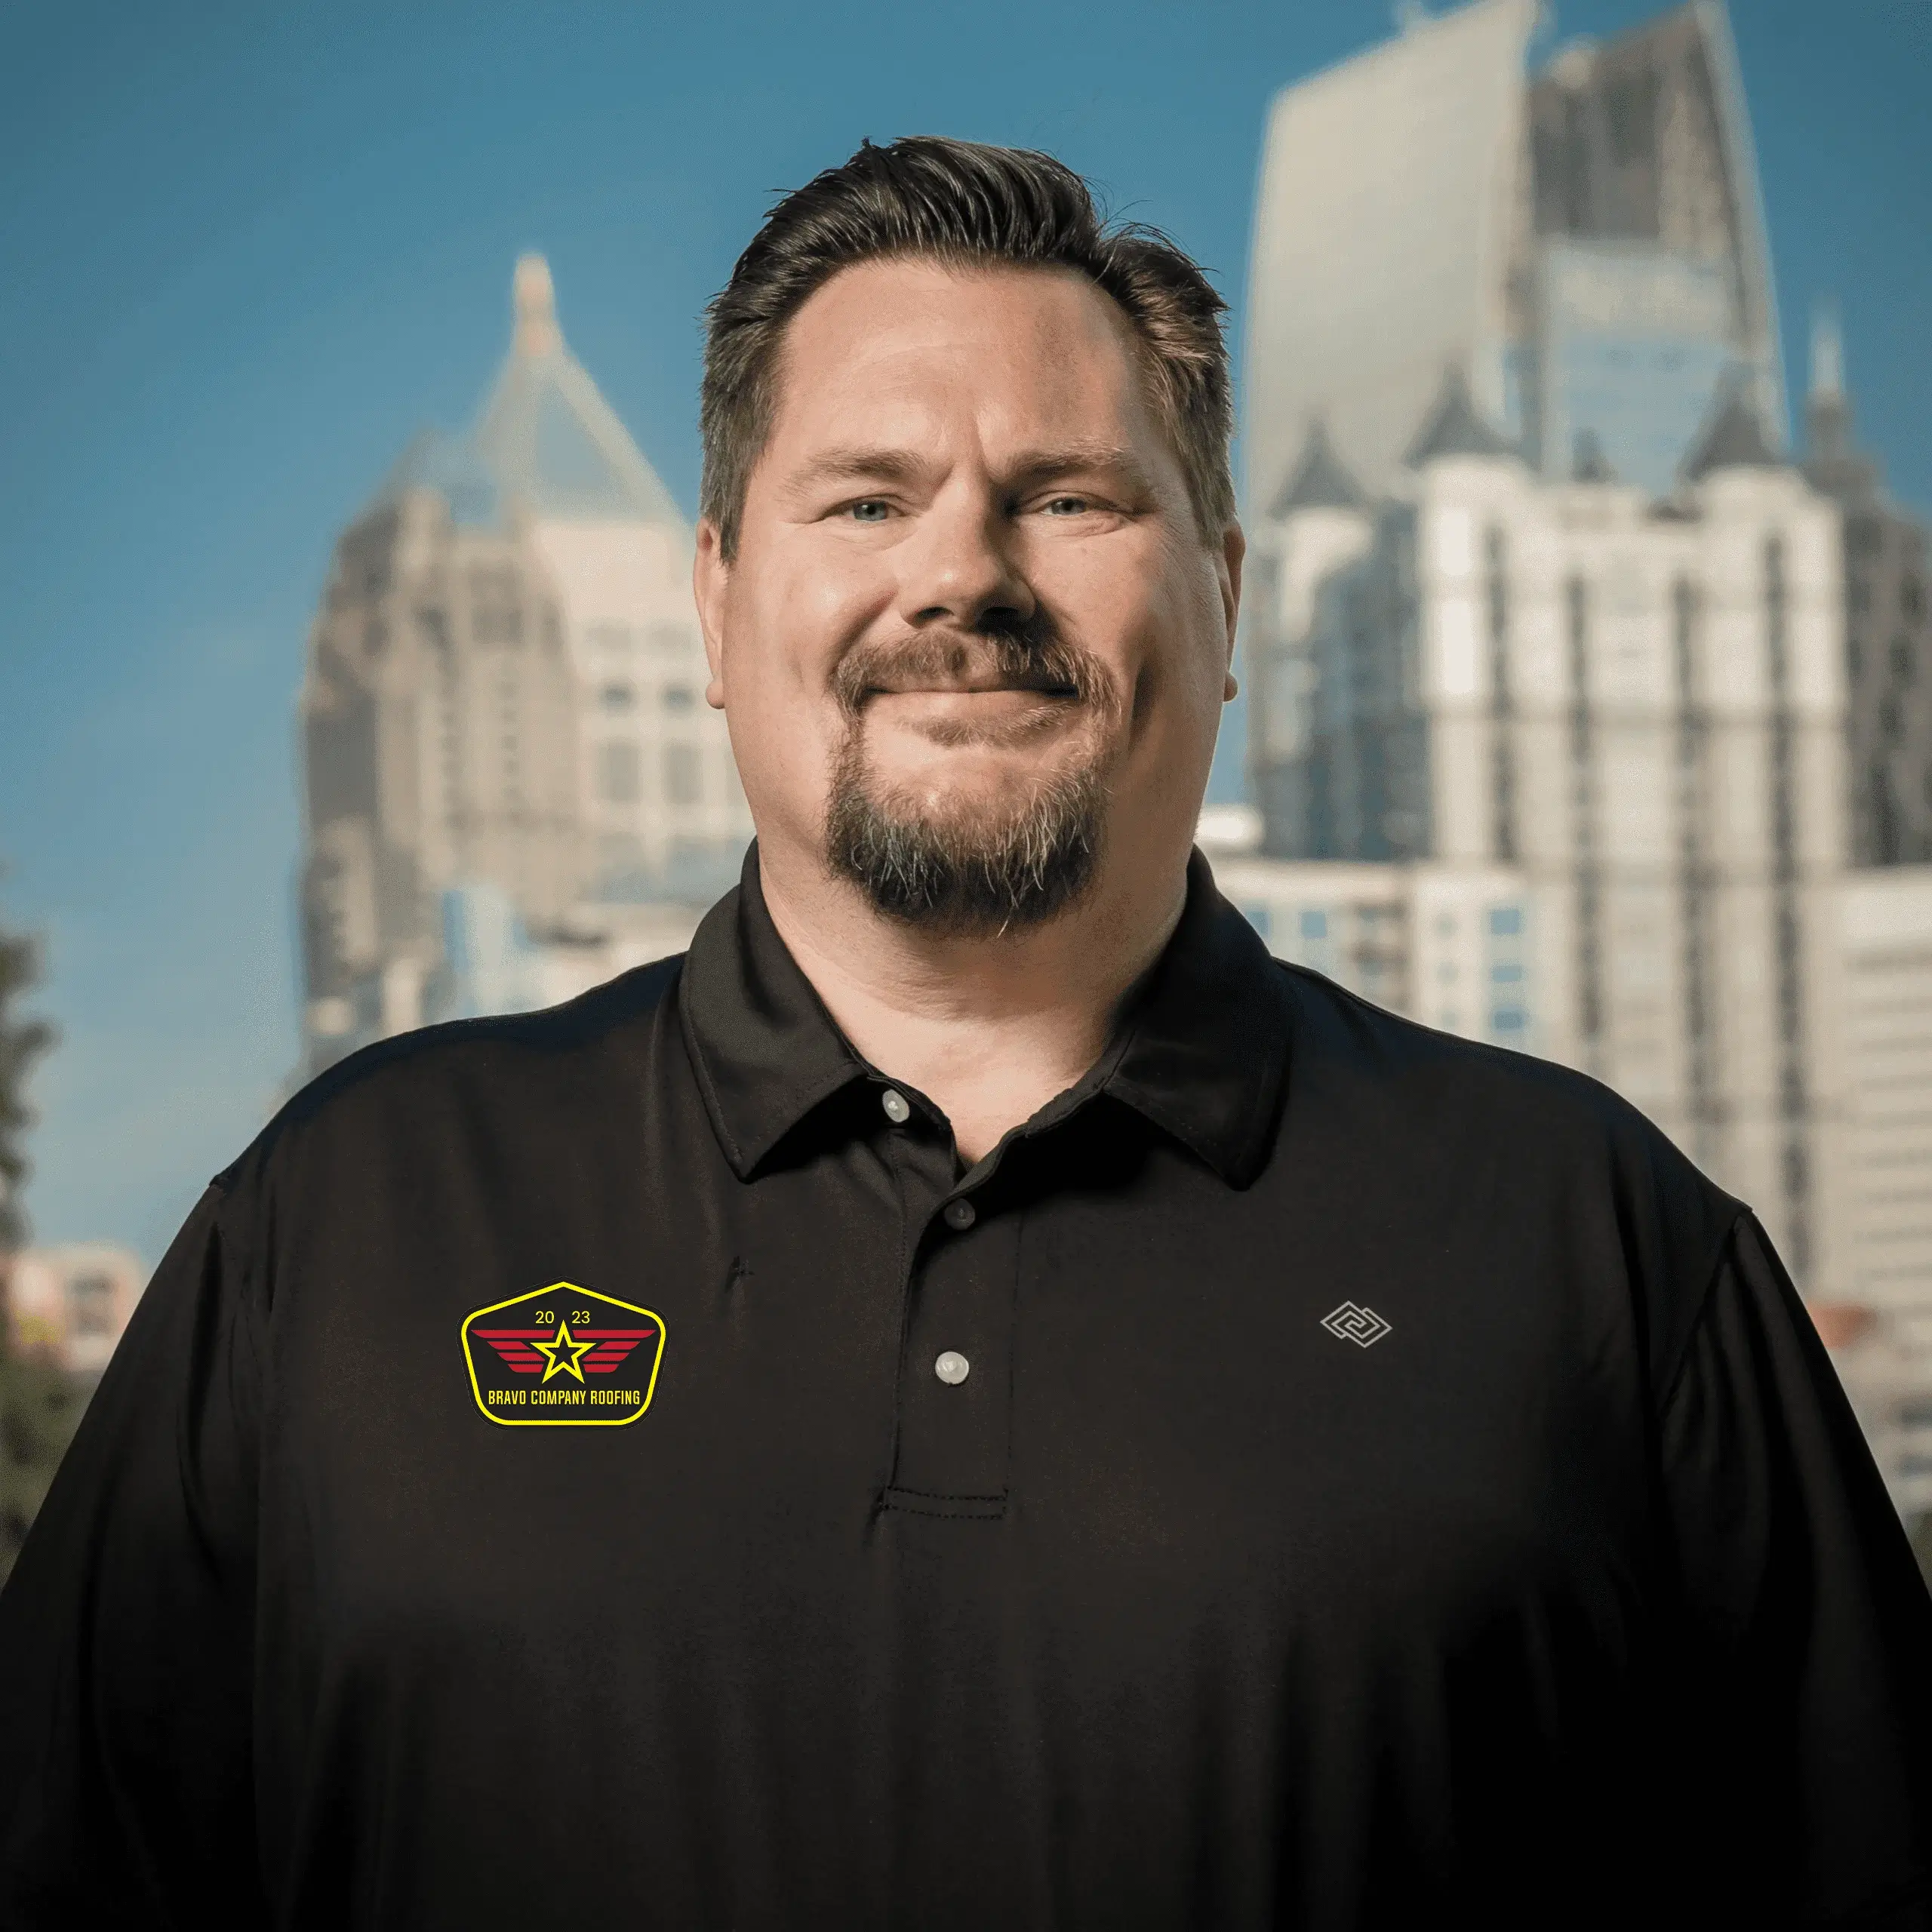 Bruce Punger the sales representative of Bravo Company Roofing | About Roofing Company in Atlanta, GA